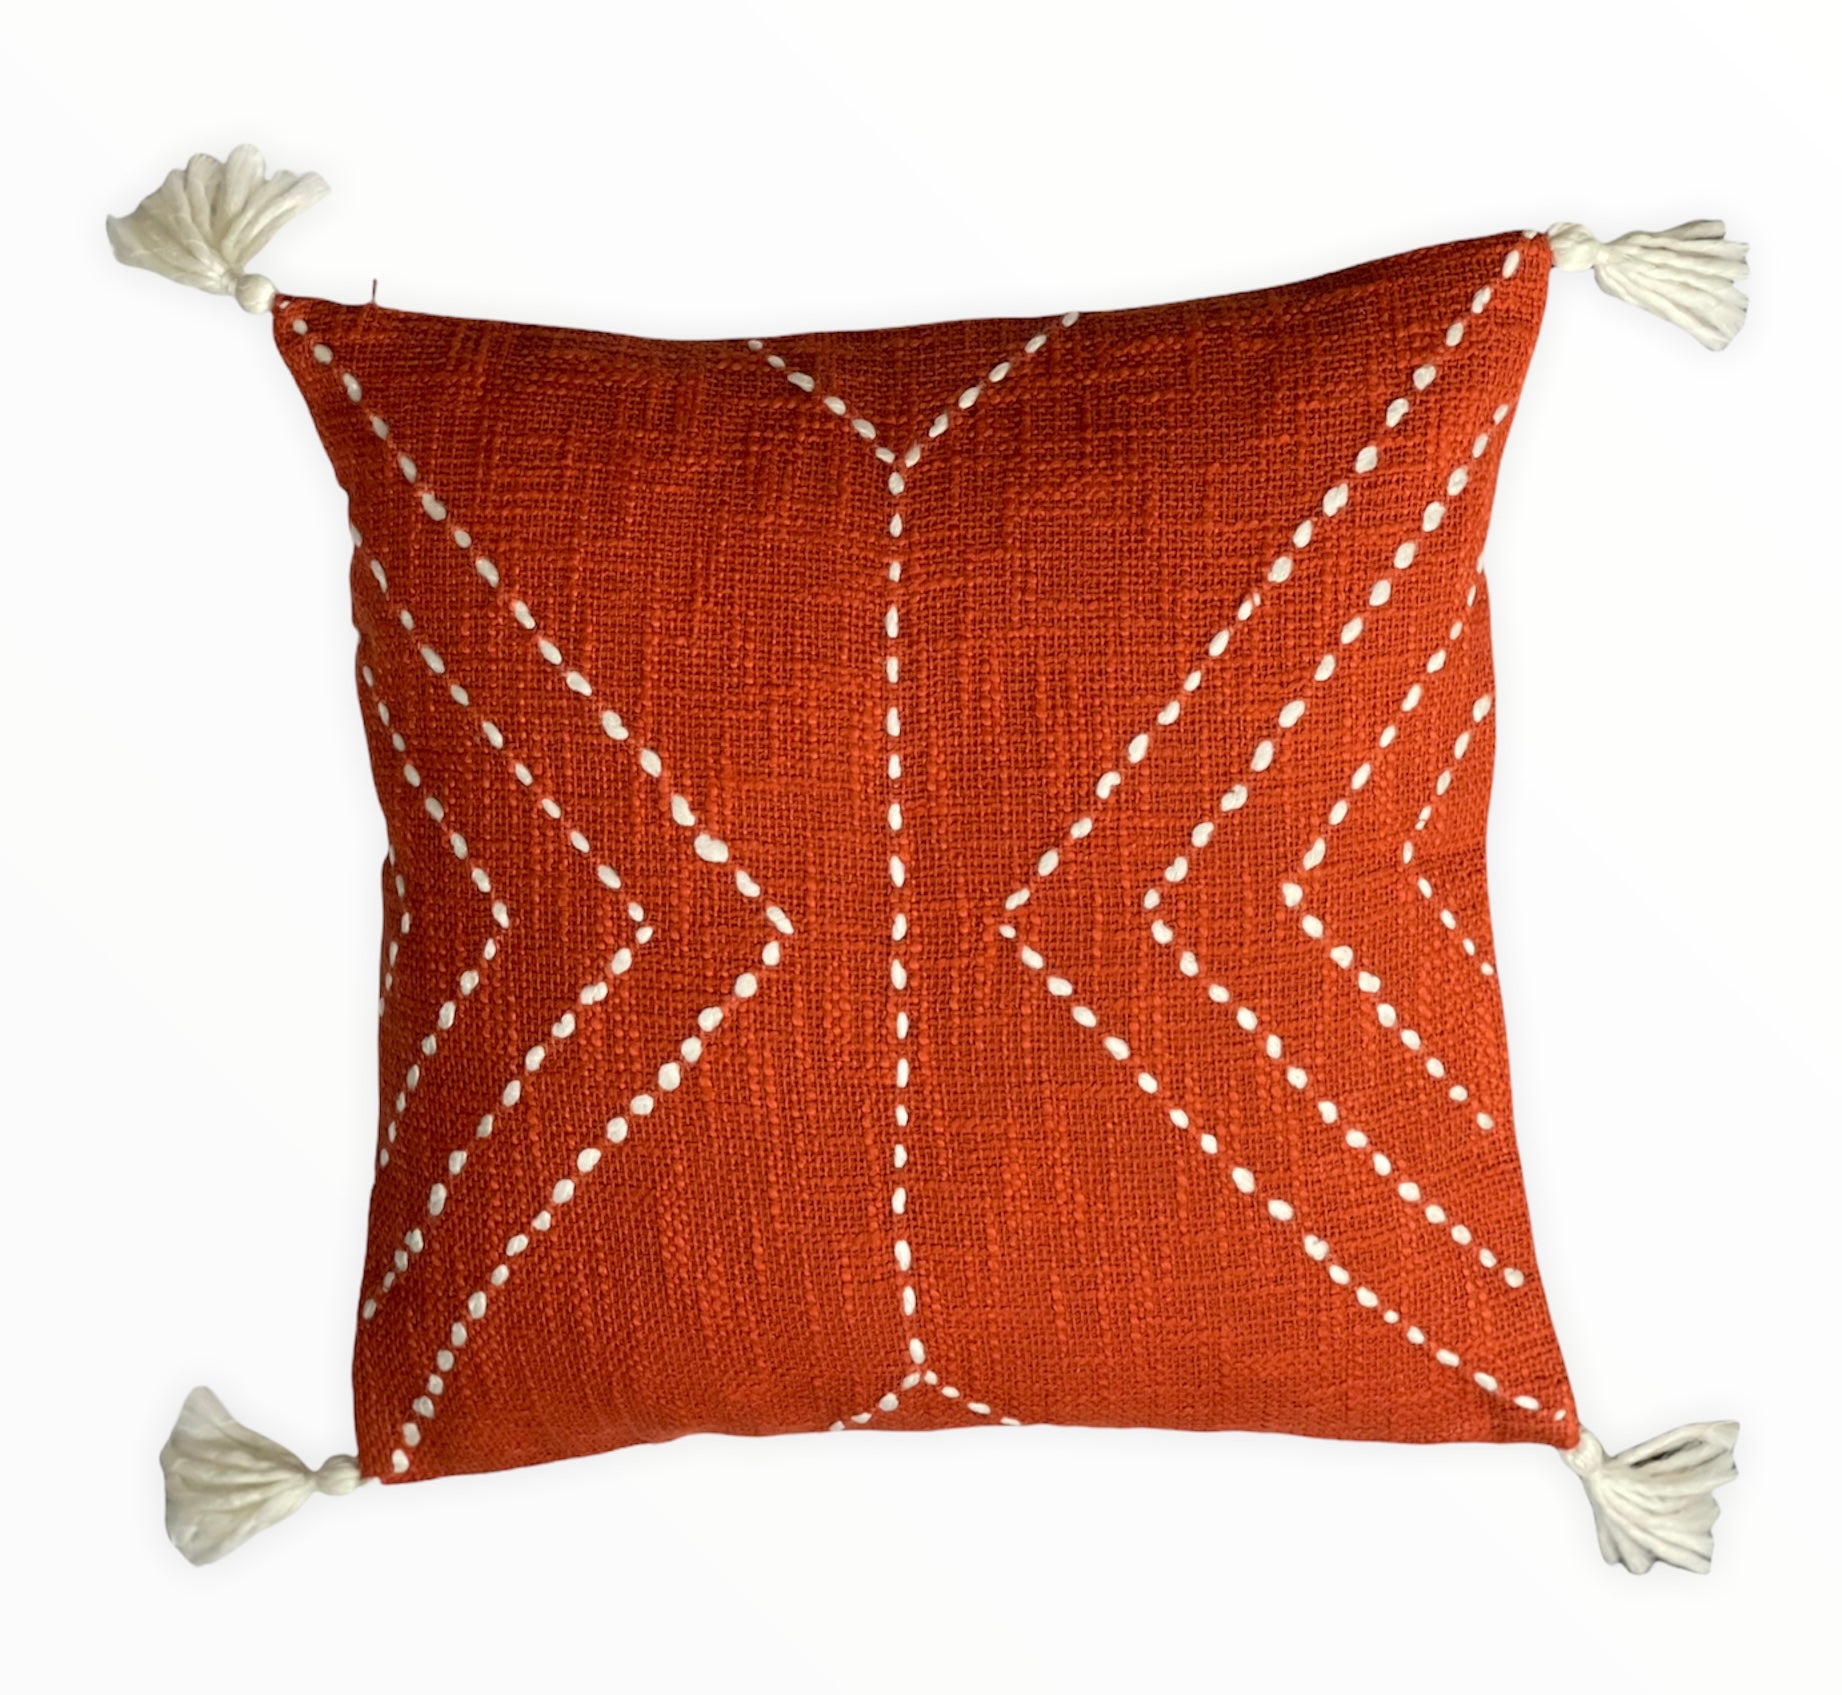 RUMENT EMBROIDERY CUSHION COVER - Stitches and Tweed 